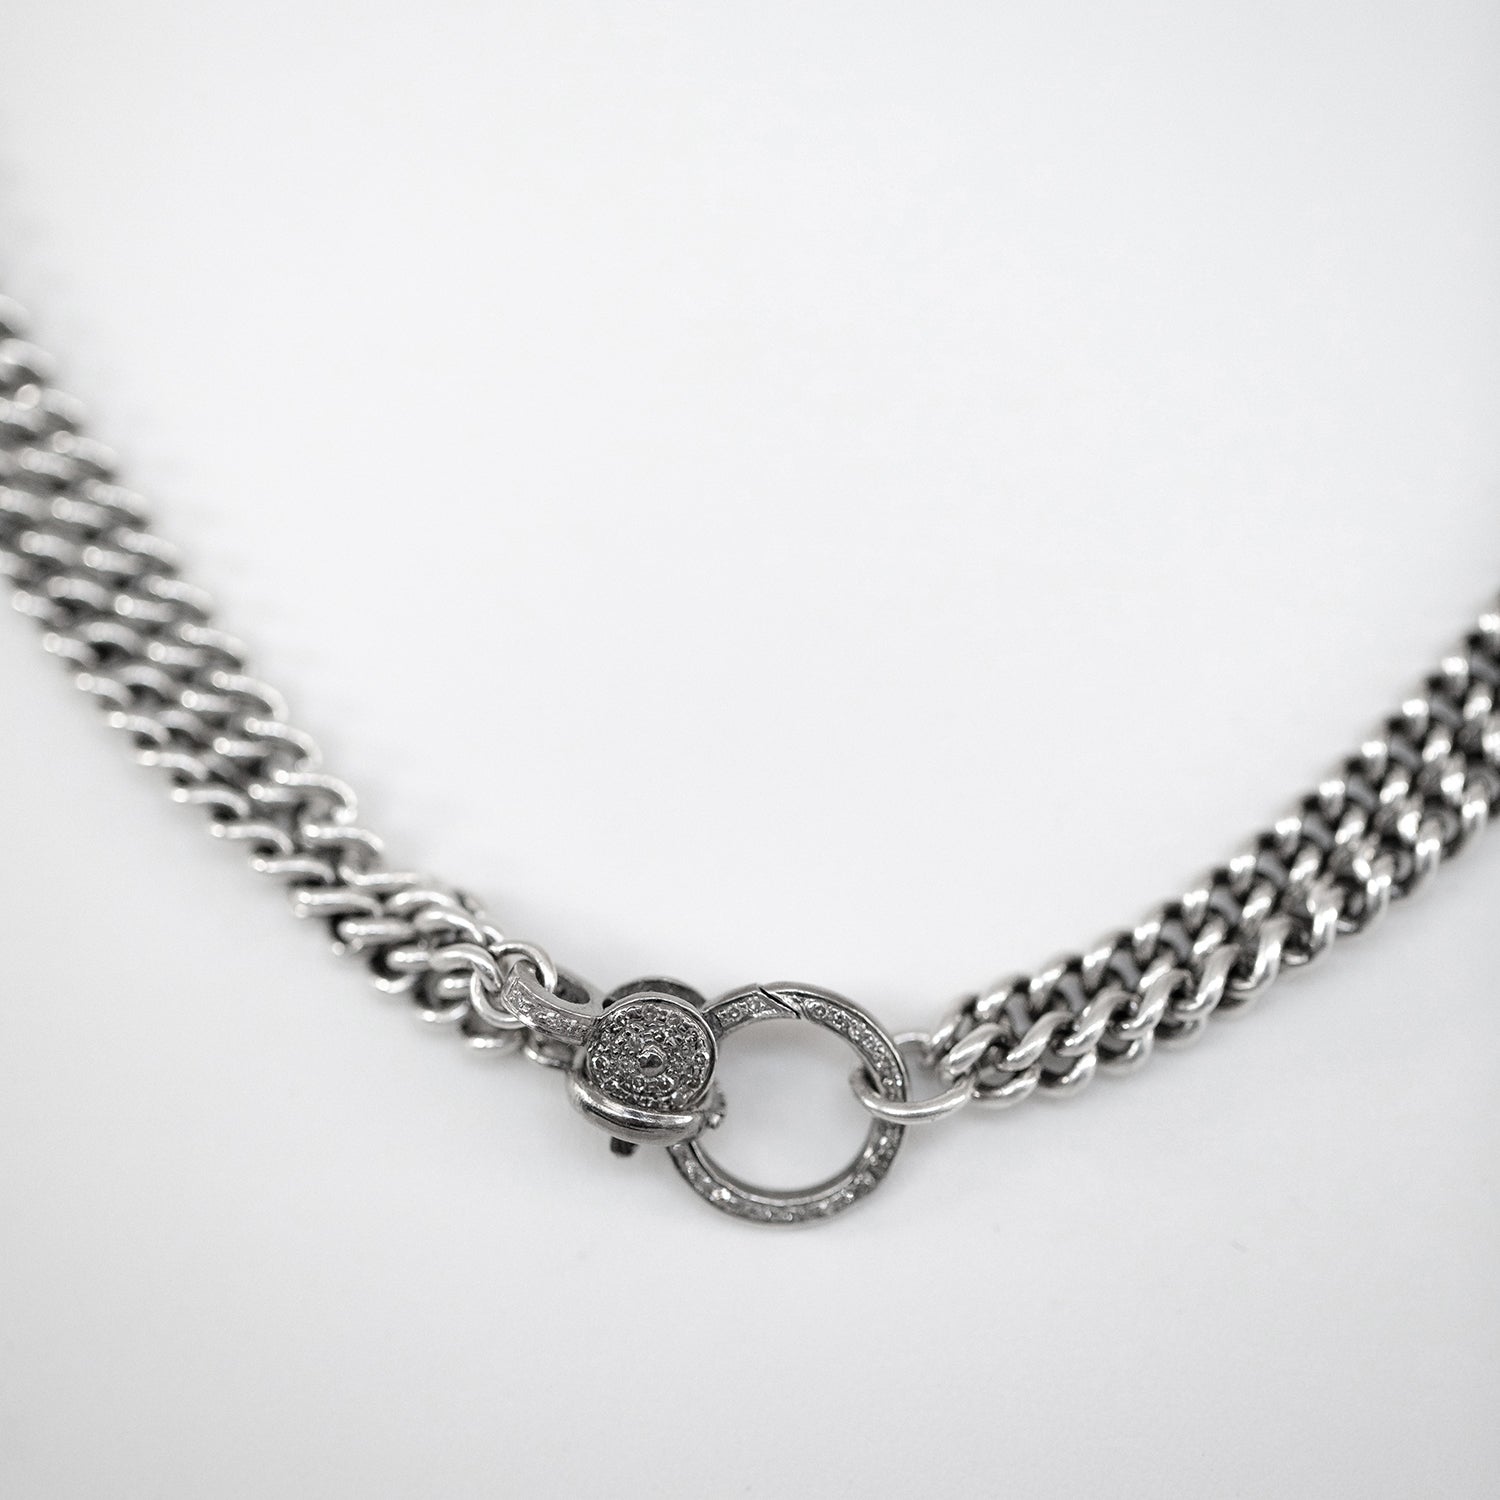 Long Curb Chain Necklace with Diamond Claw Clasp NB000024 - TBird